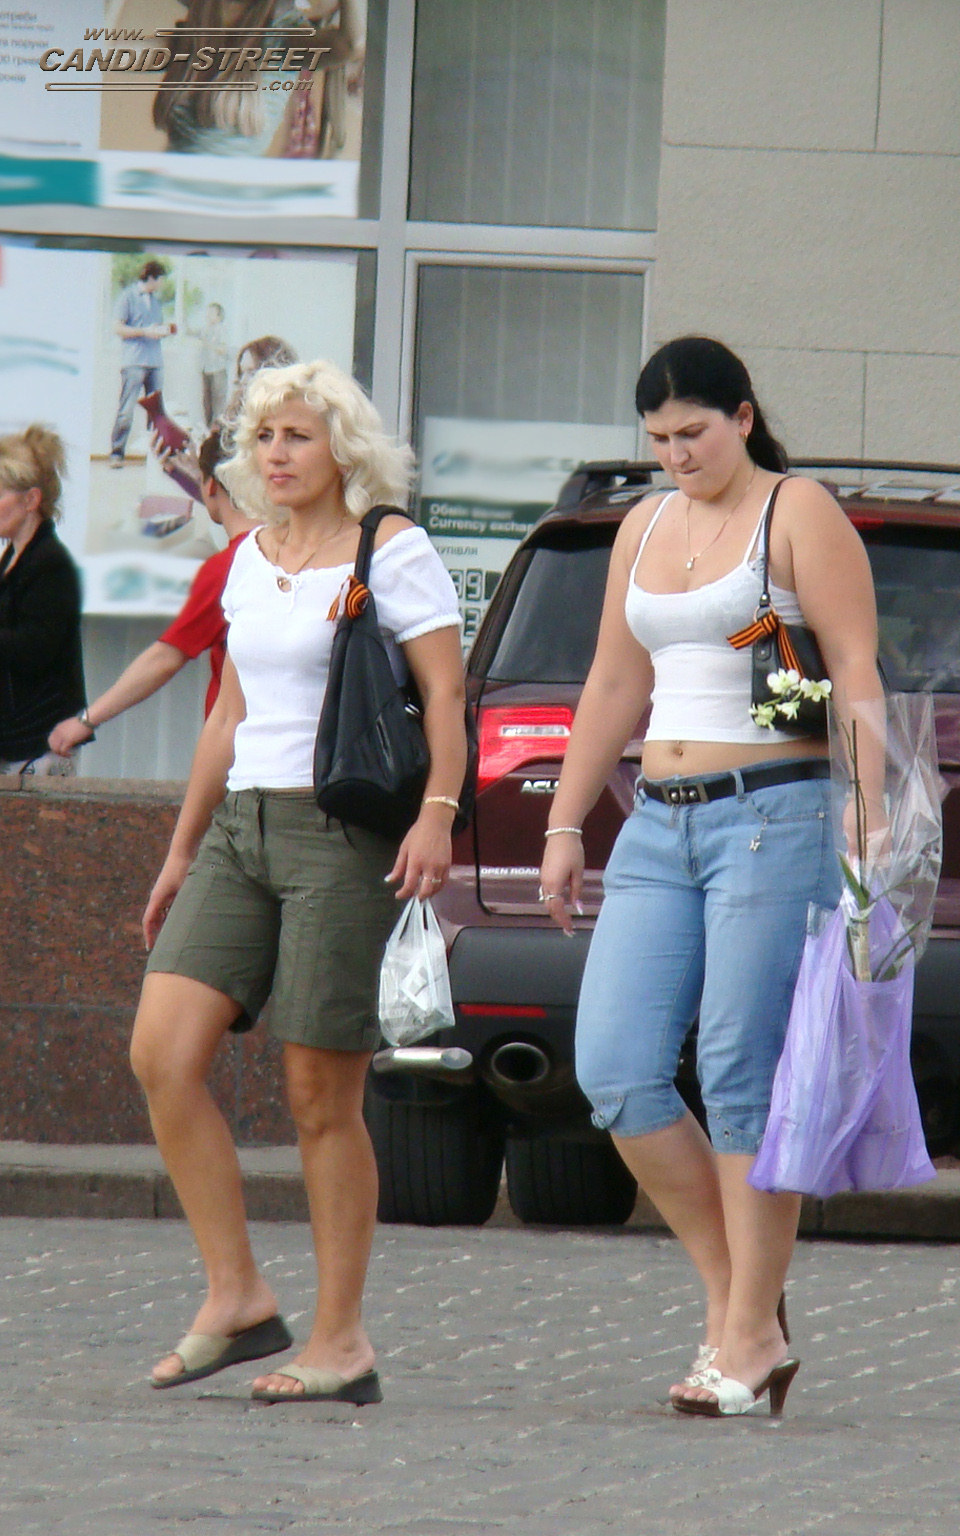 Busty girls candid shots - 05-dsc05973 from Candid Street